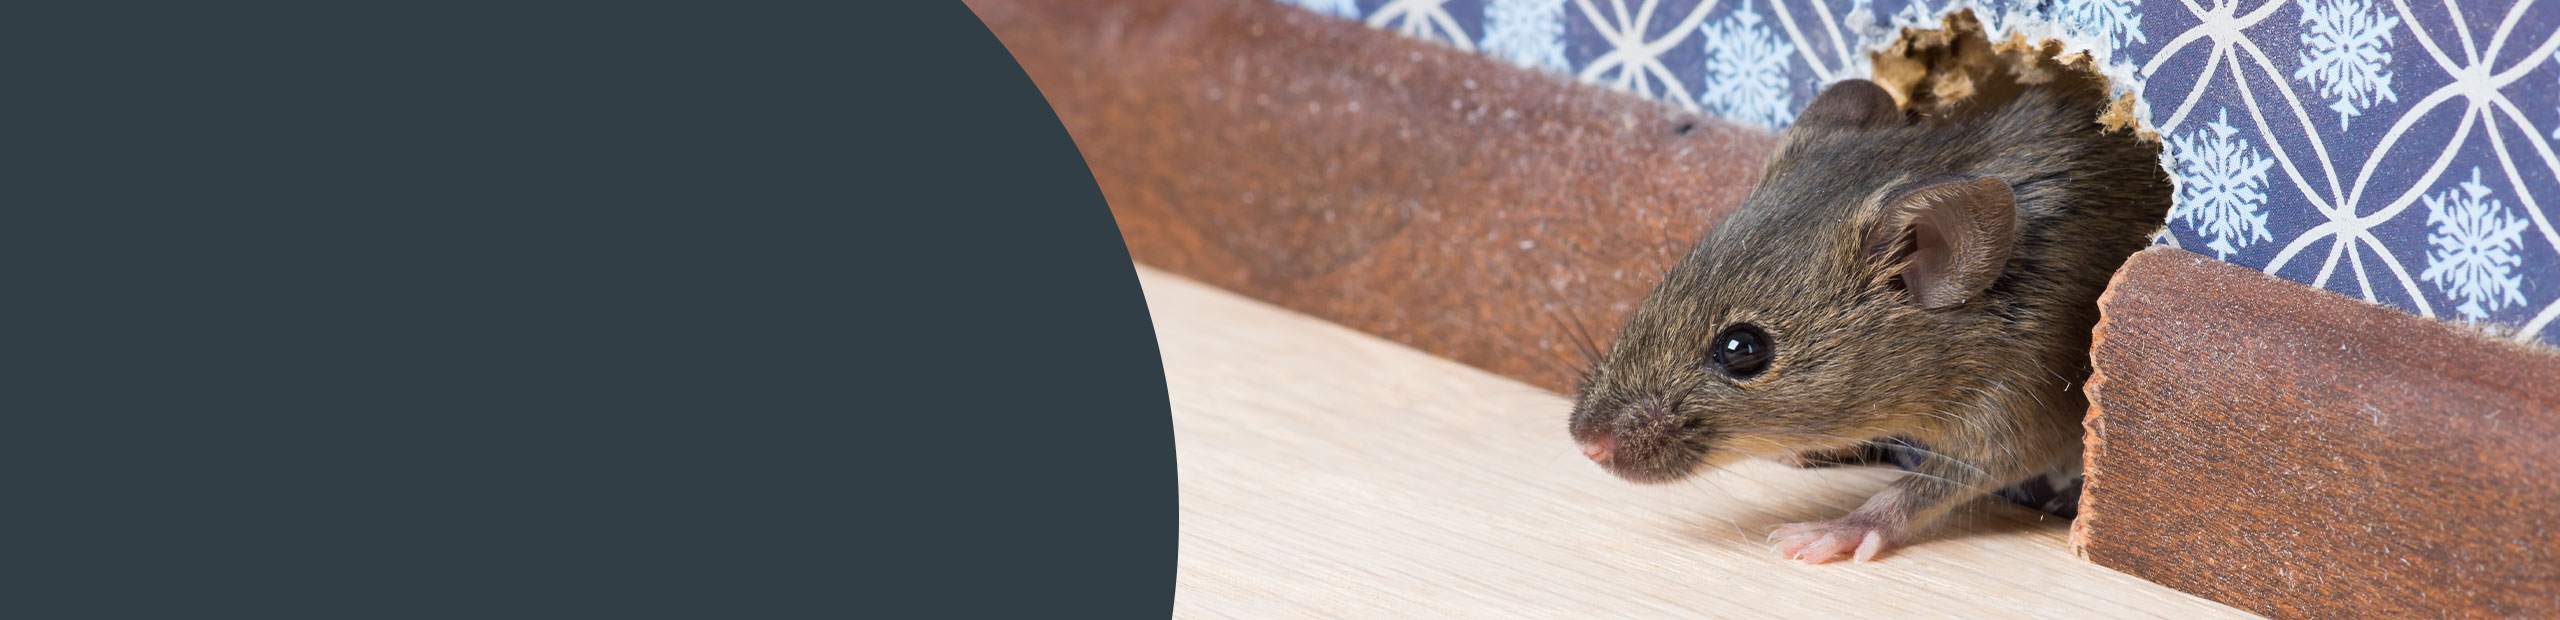  Rodent Removal Services - Greenwich